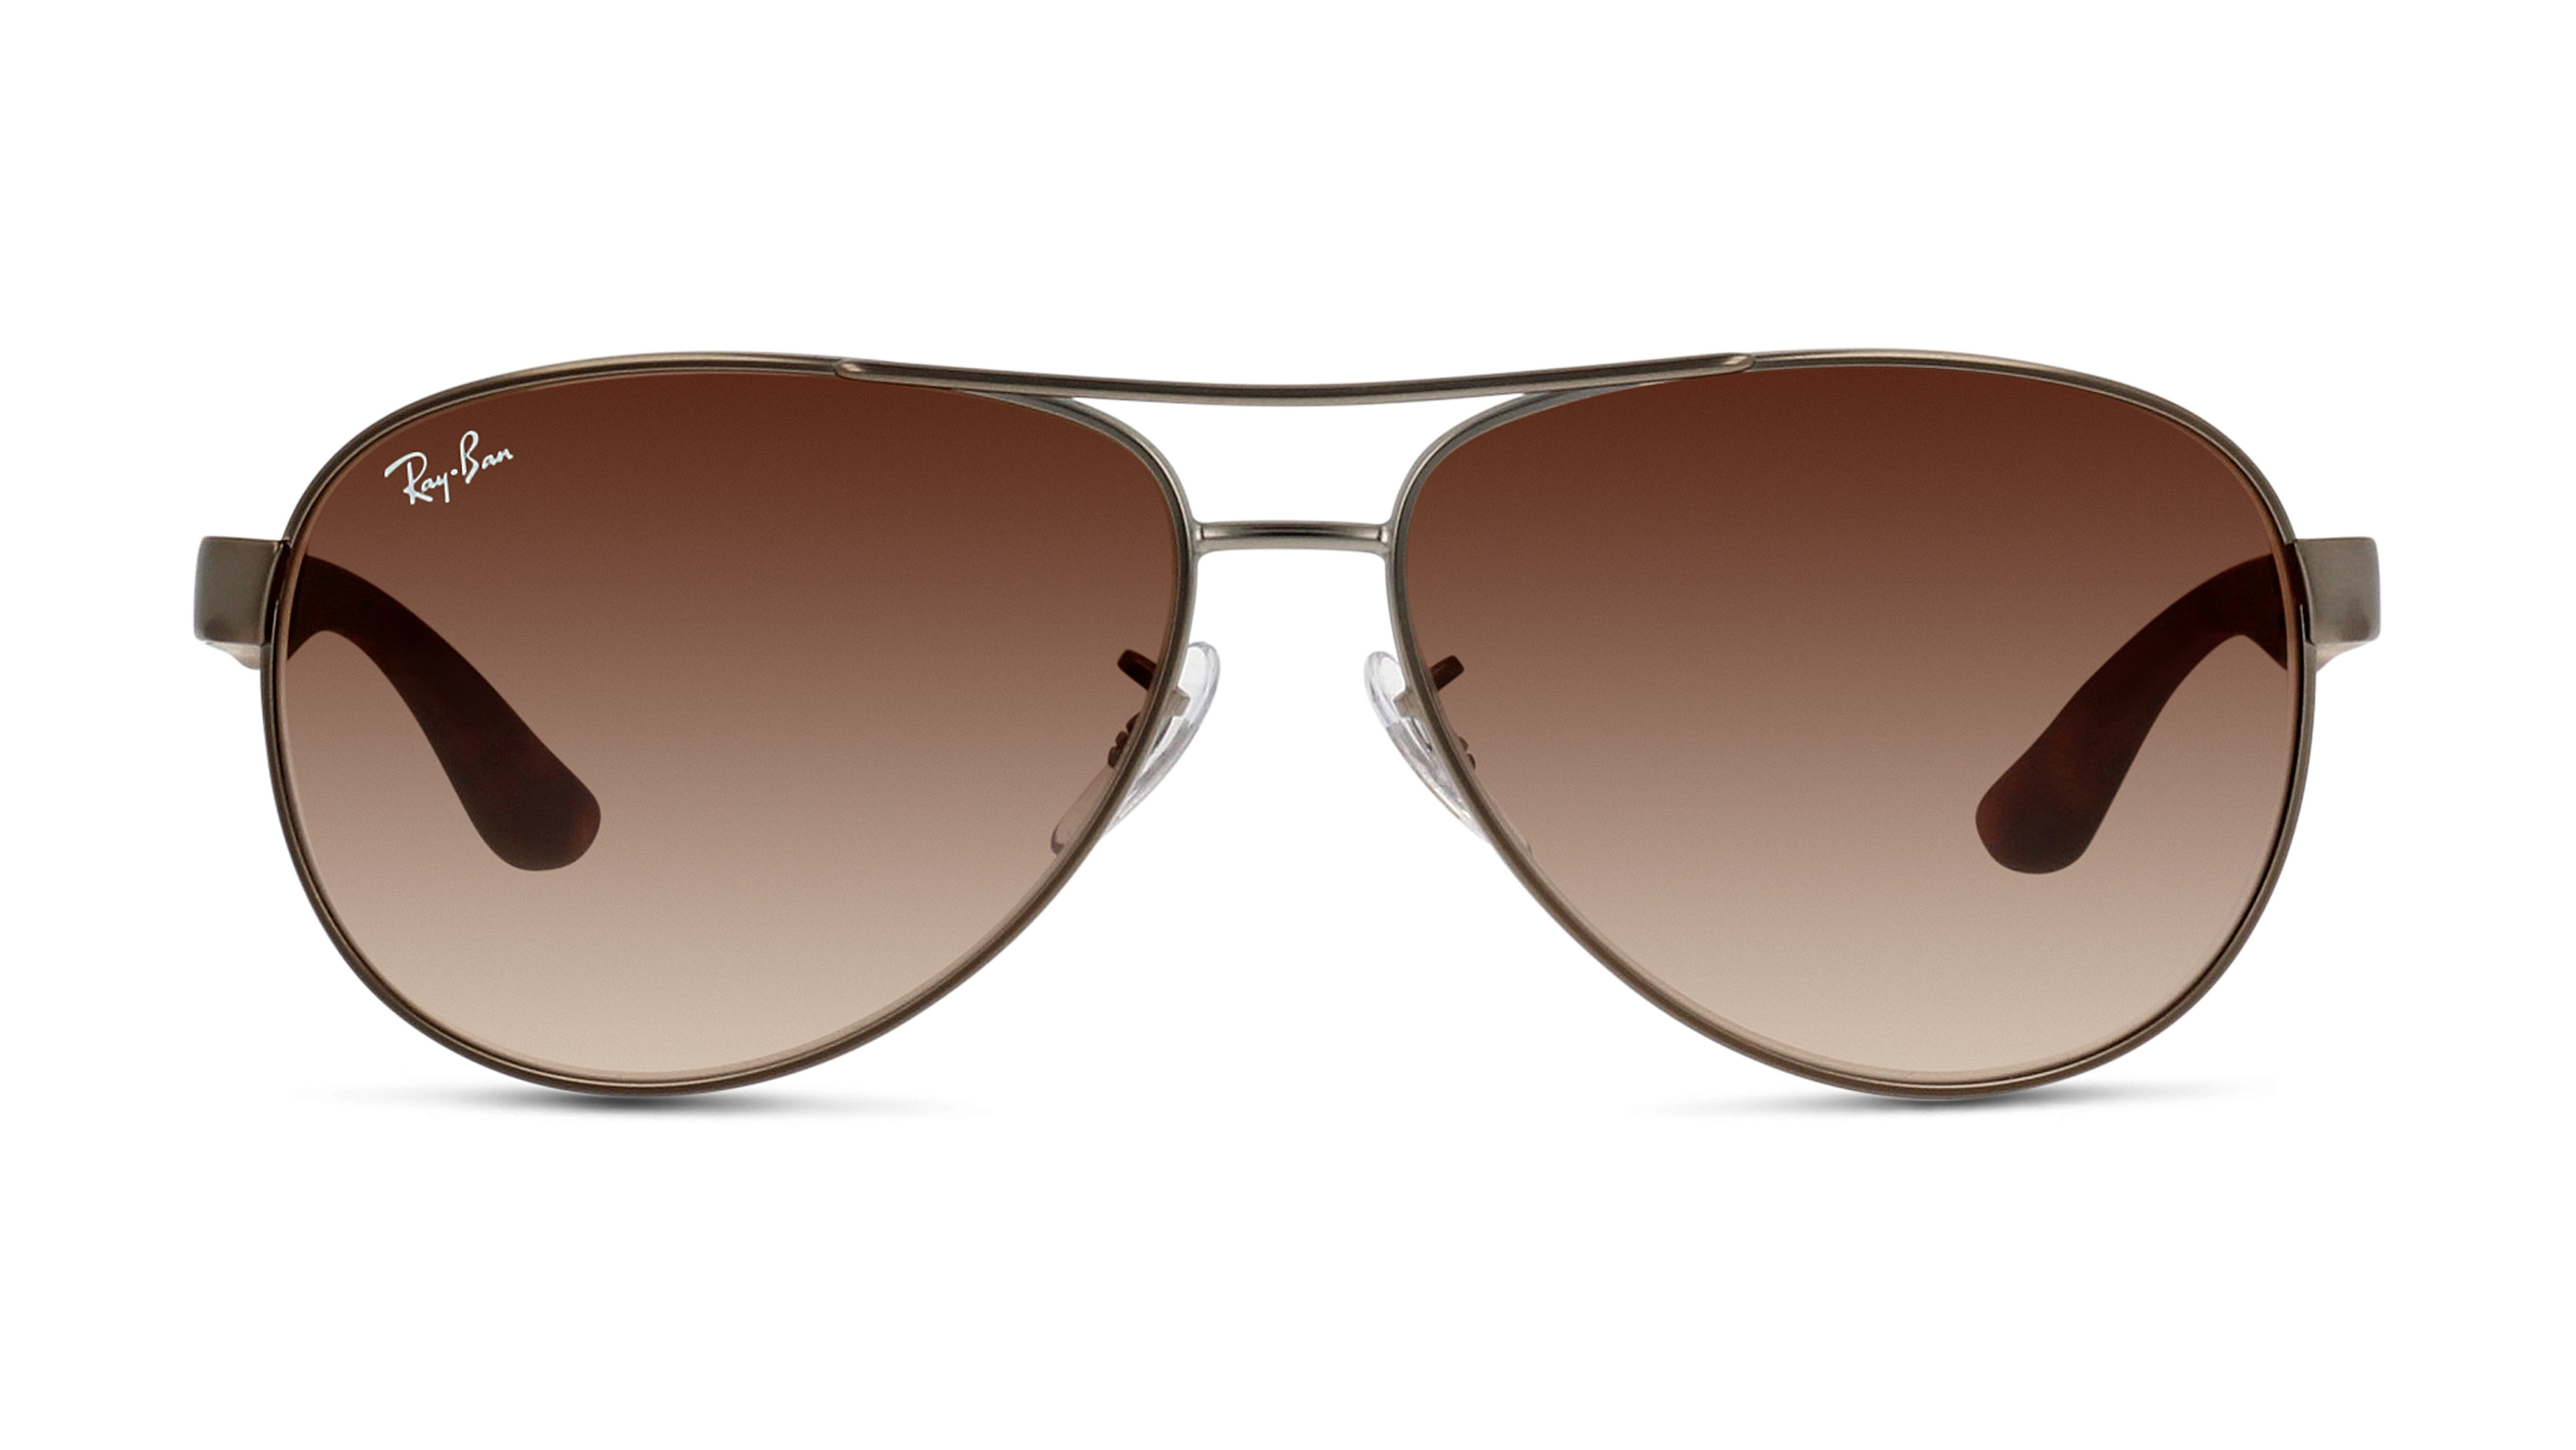 [products.image.front] Ray-Ban 0RB3457 029/13 Sonnenbrille